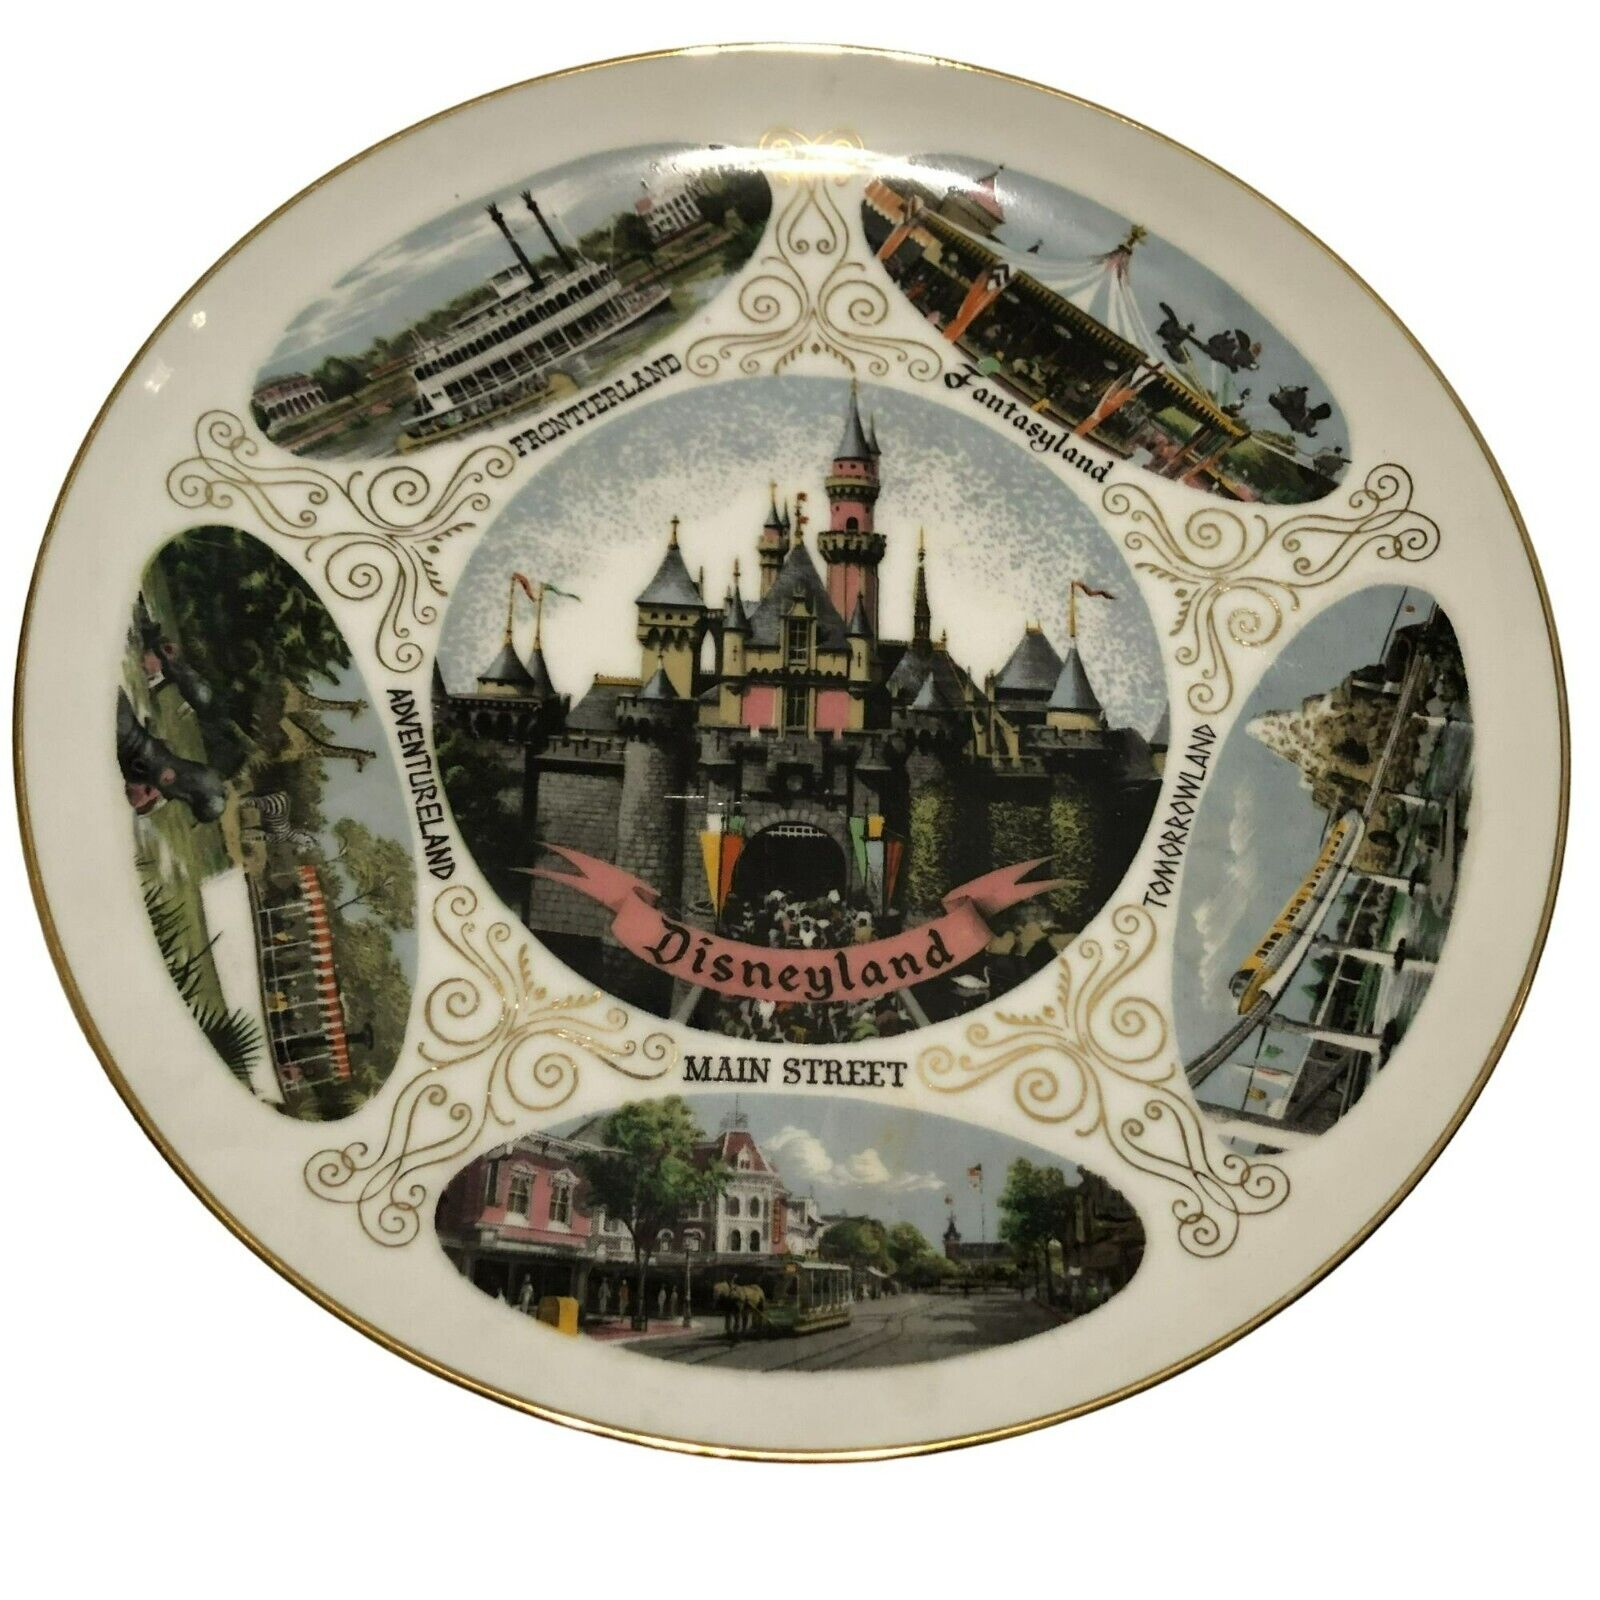 VTG DISNEYLAND SOUVENIR PLATE EARLY ATTRACTIONS 1960s BONE CHINA MADE IN JAPAN